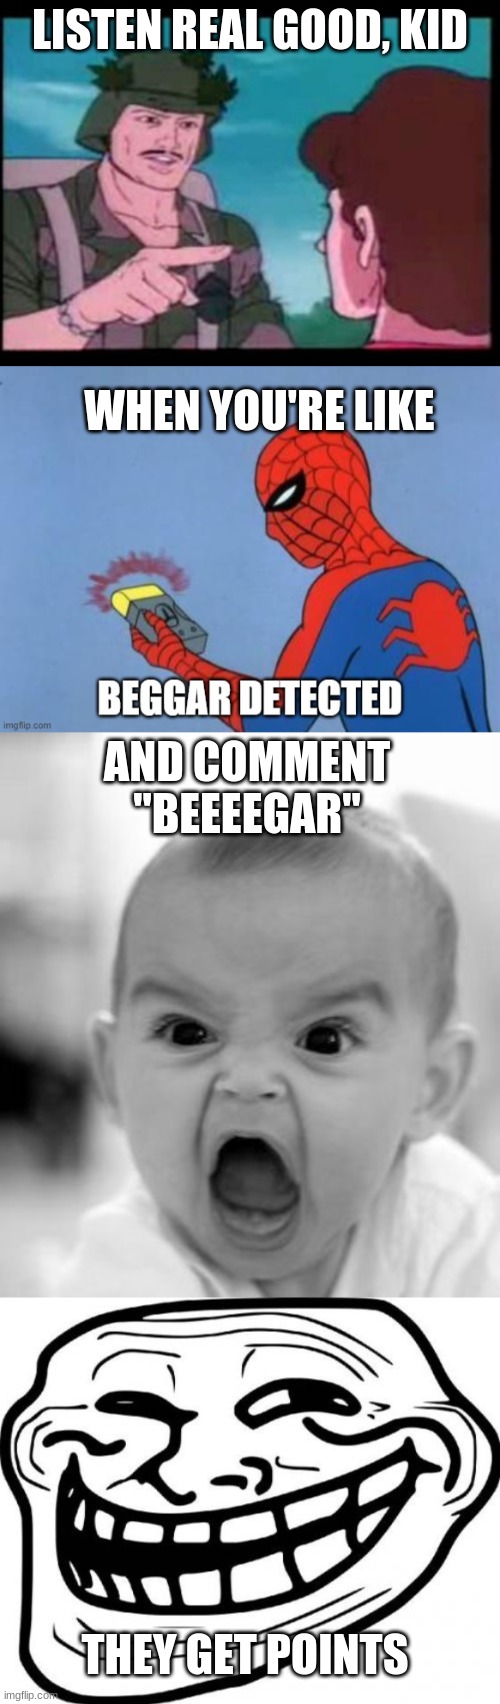 UPVOTE BEGGARS PSA | LISTEN REAL GOOD, KID; WHEN YOU'RE LIKE; AND COMMENT
"BEEEEGAR"; THEY GET POINTS | image tagged in memes,upvote begging,psa,imgflip,upvote beggar,trolls | made w/ Imgflip meme maker